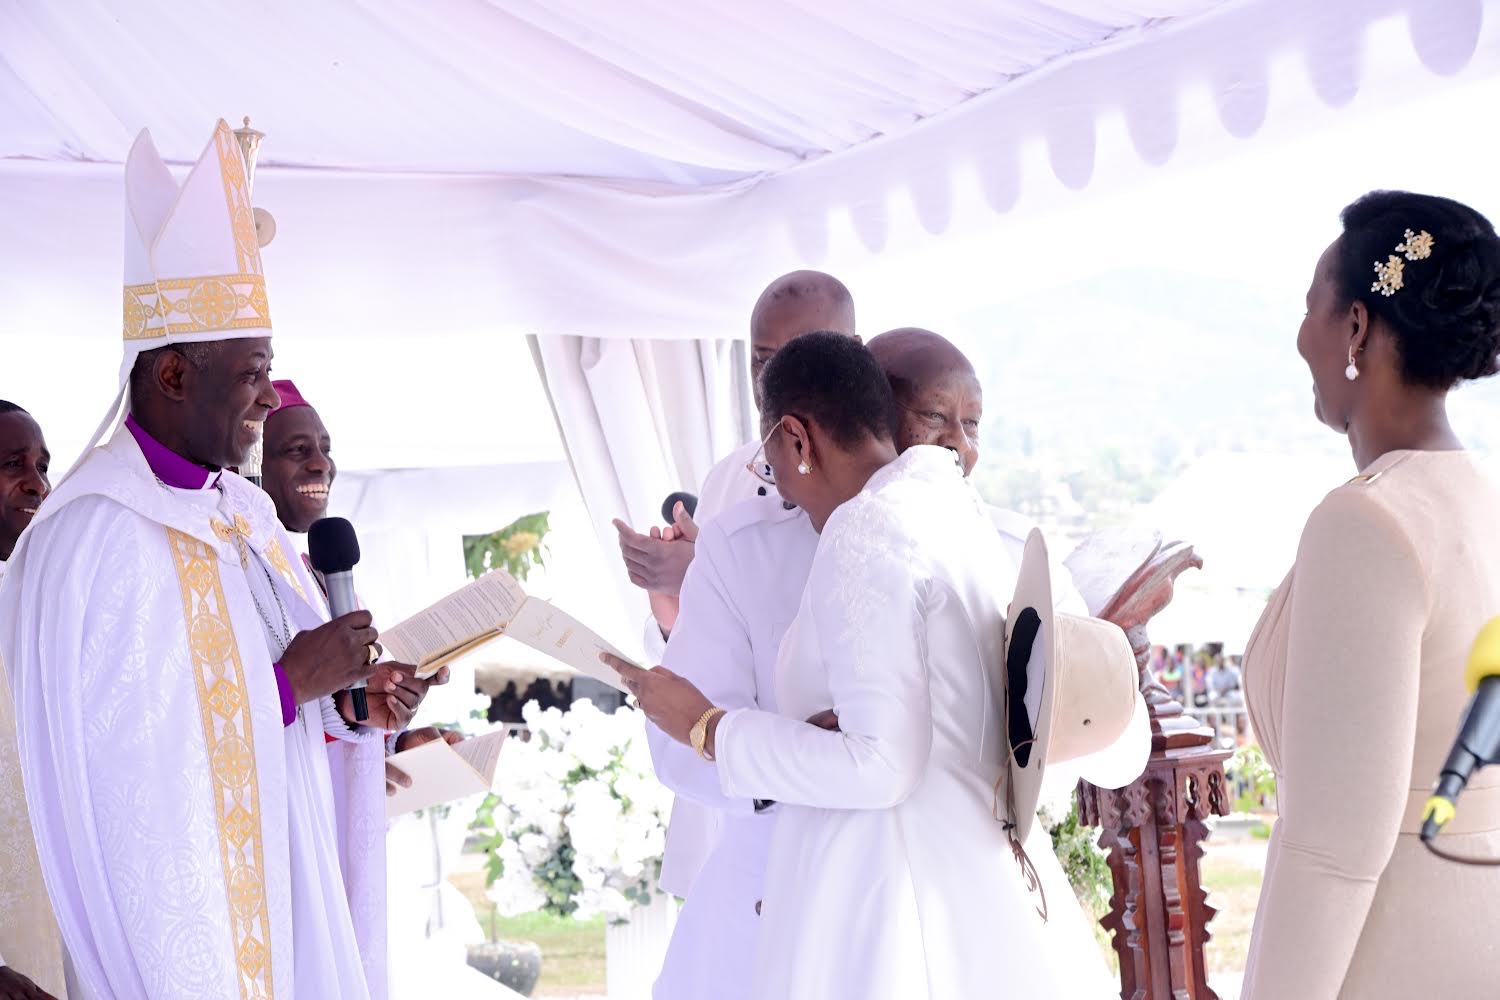 President Museveni’s emotional vulnerability is brought to the fore as marriage anniversary sounds loud political bells